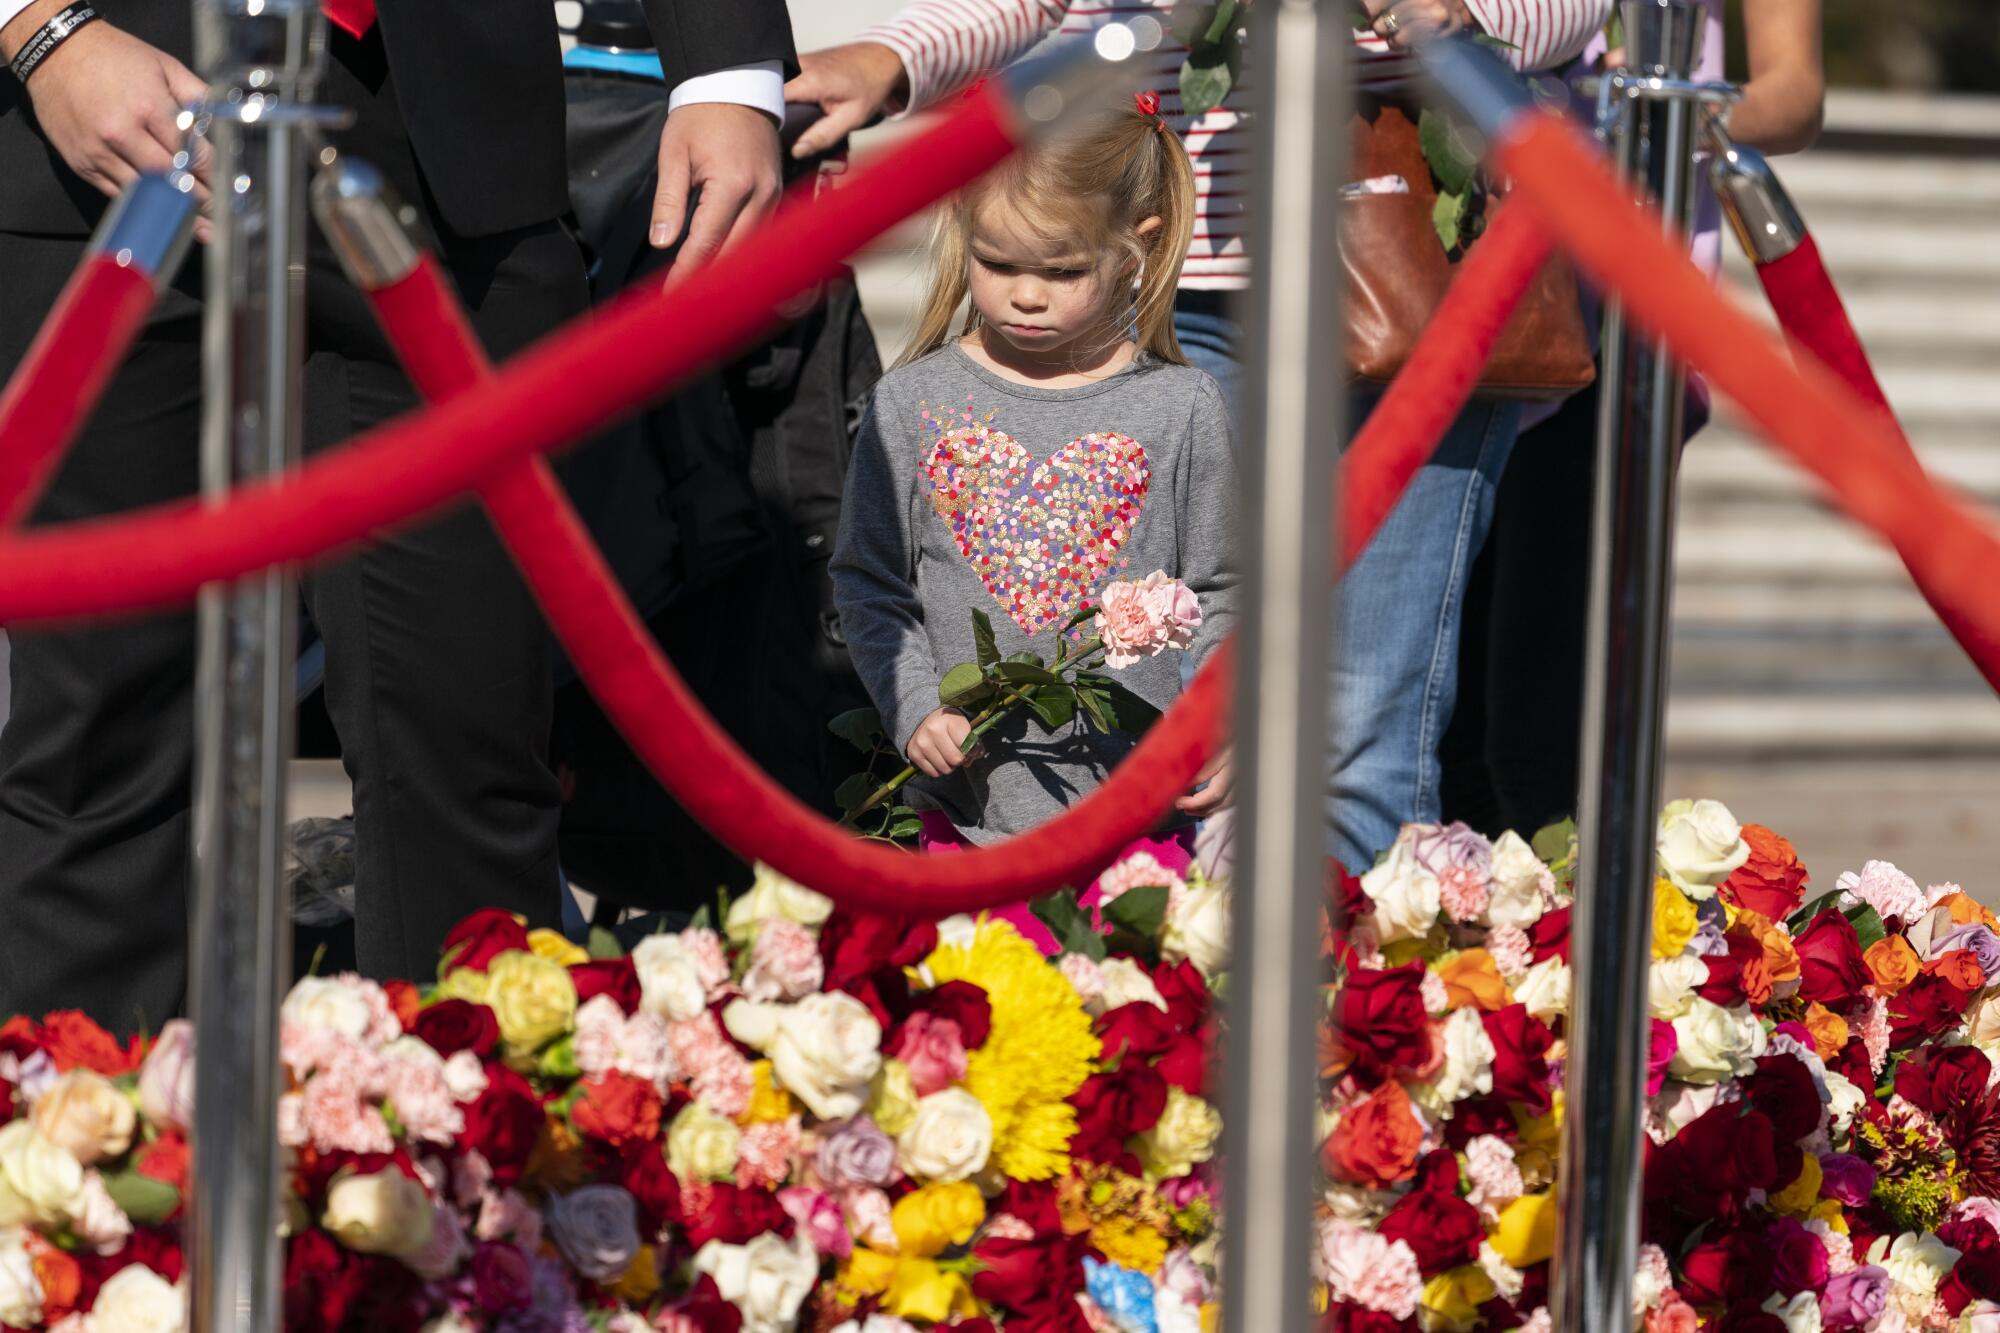 A child prepares to place a flower